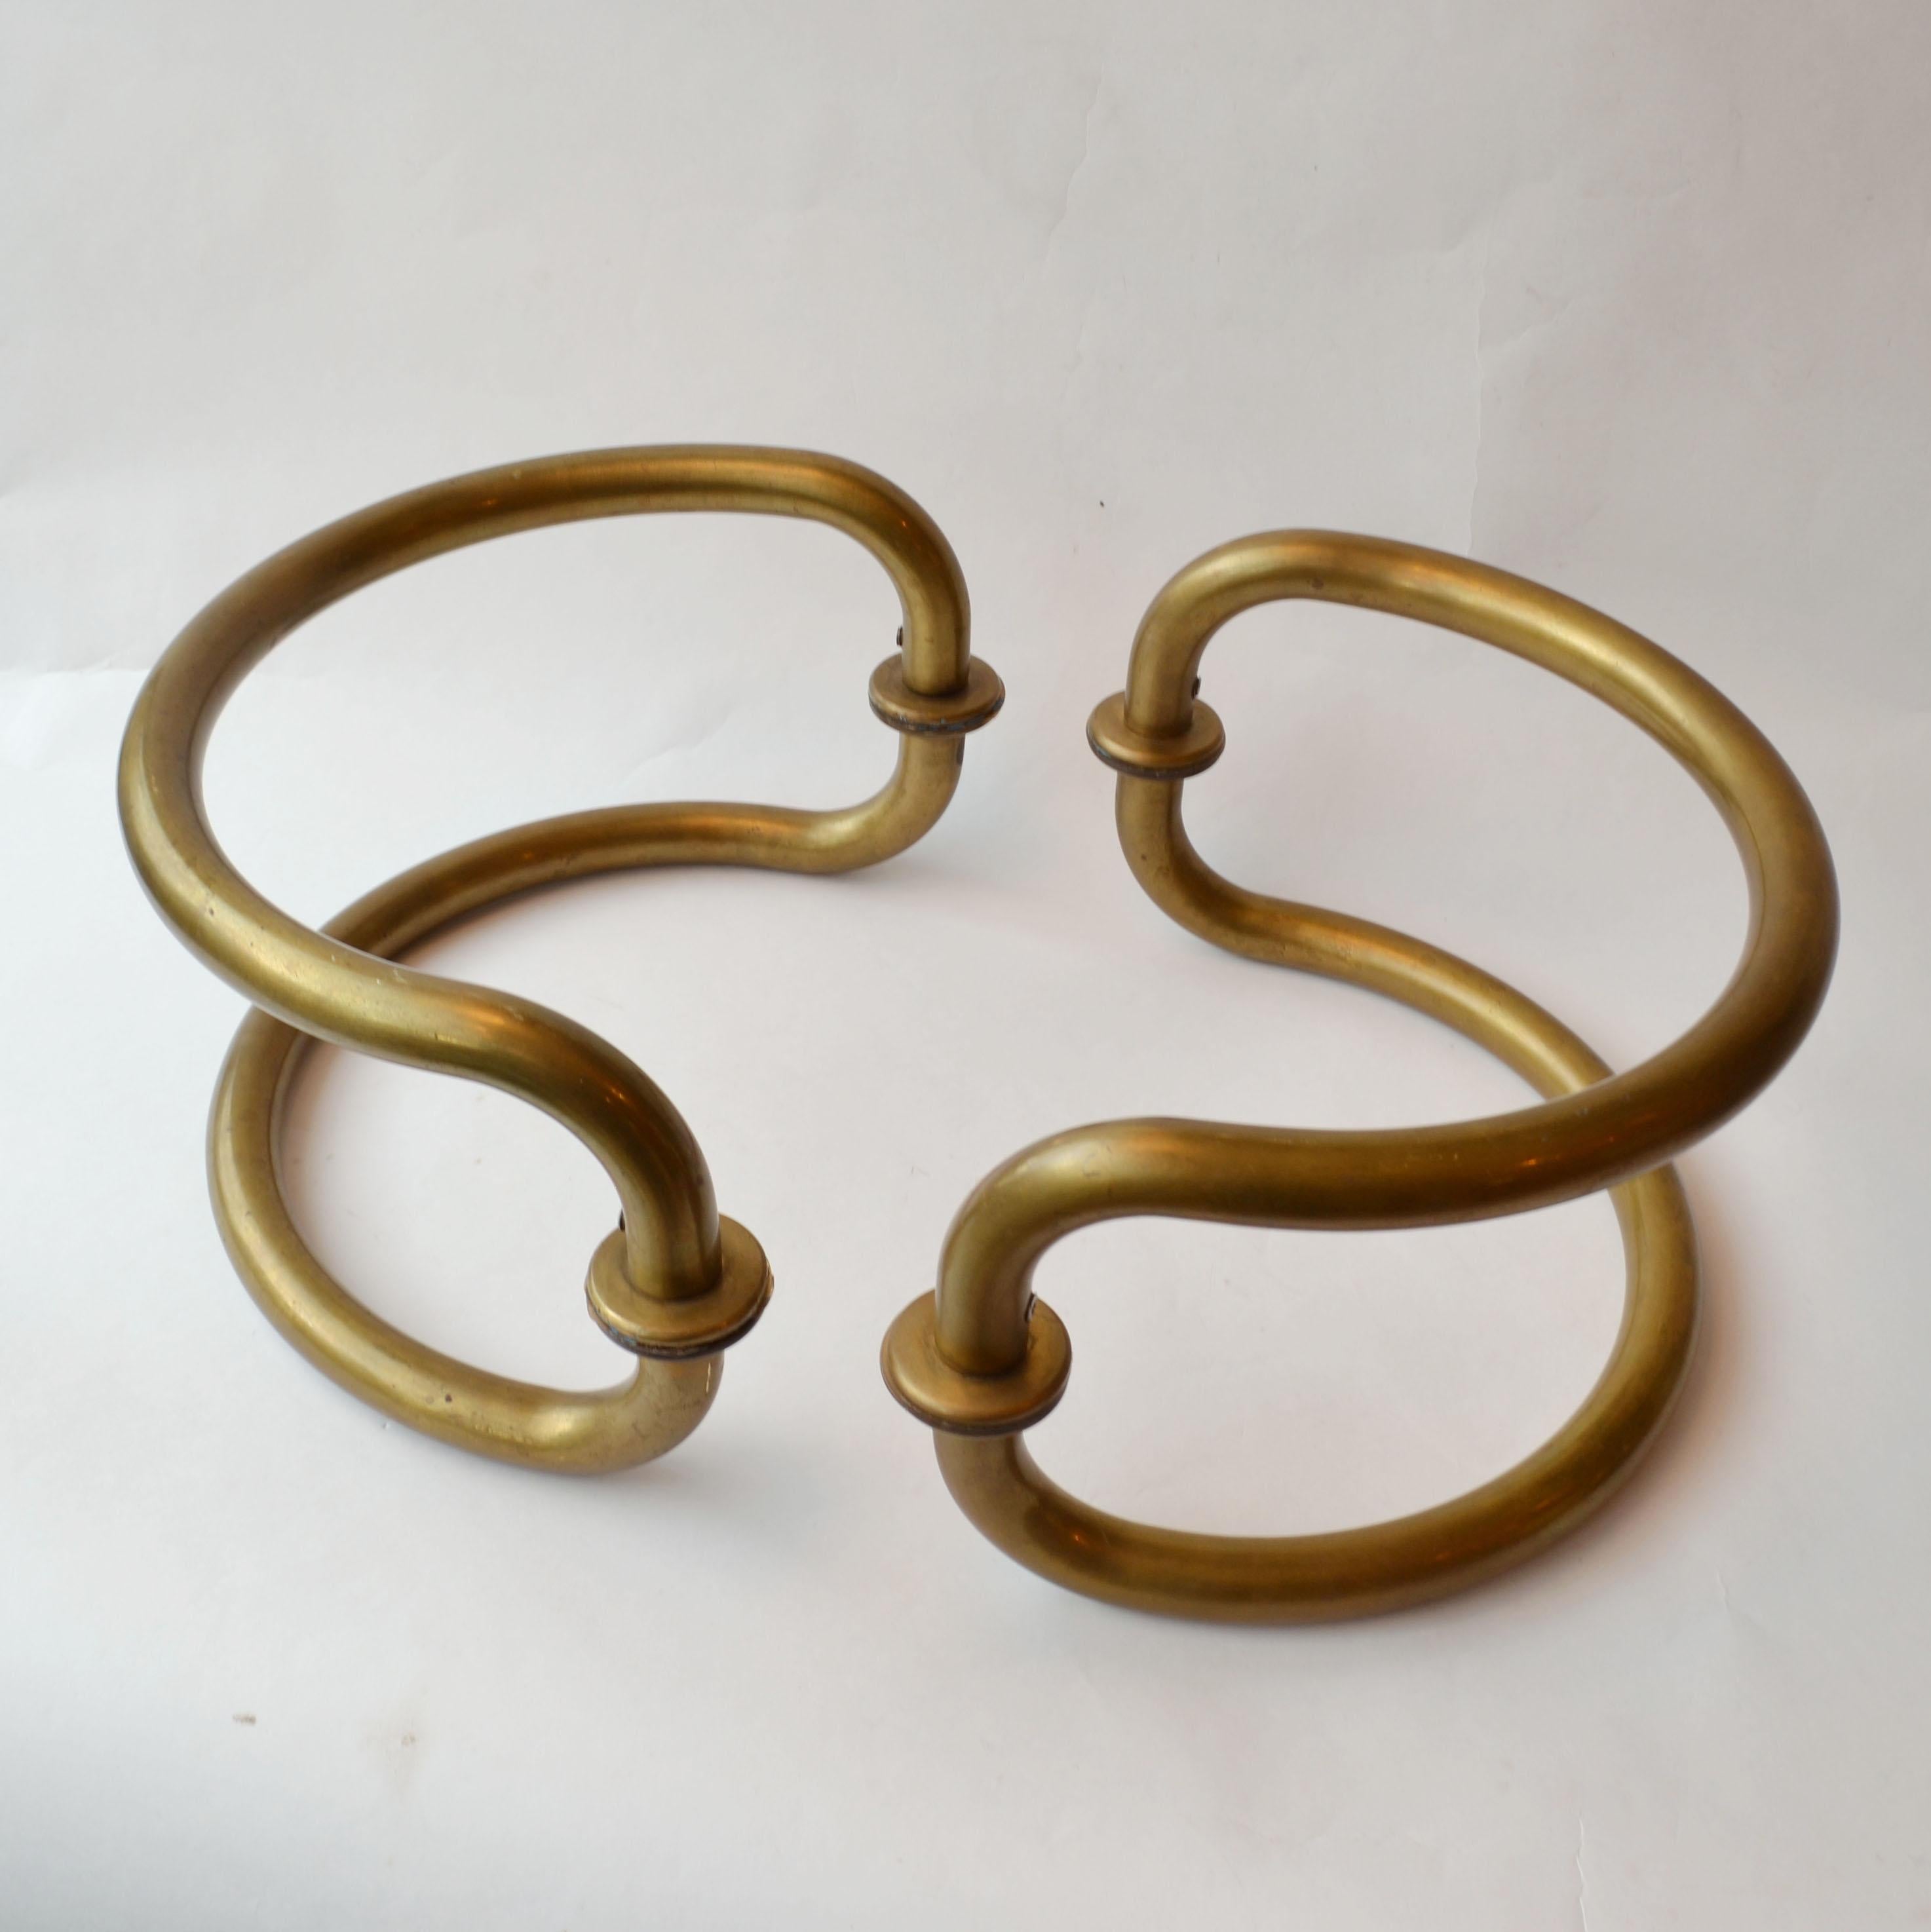 Mid-20th Century Large Pair of Curved Tubular Brass Double Door Push & Pull Door Handles